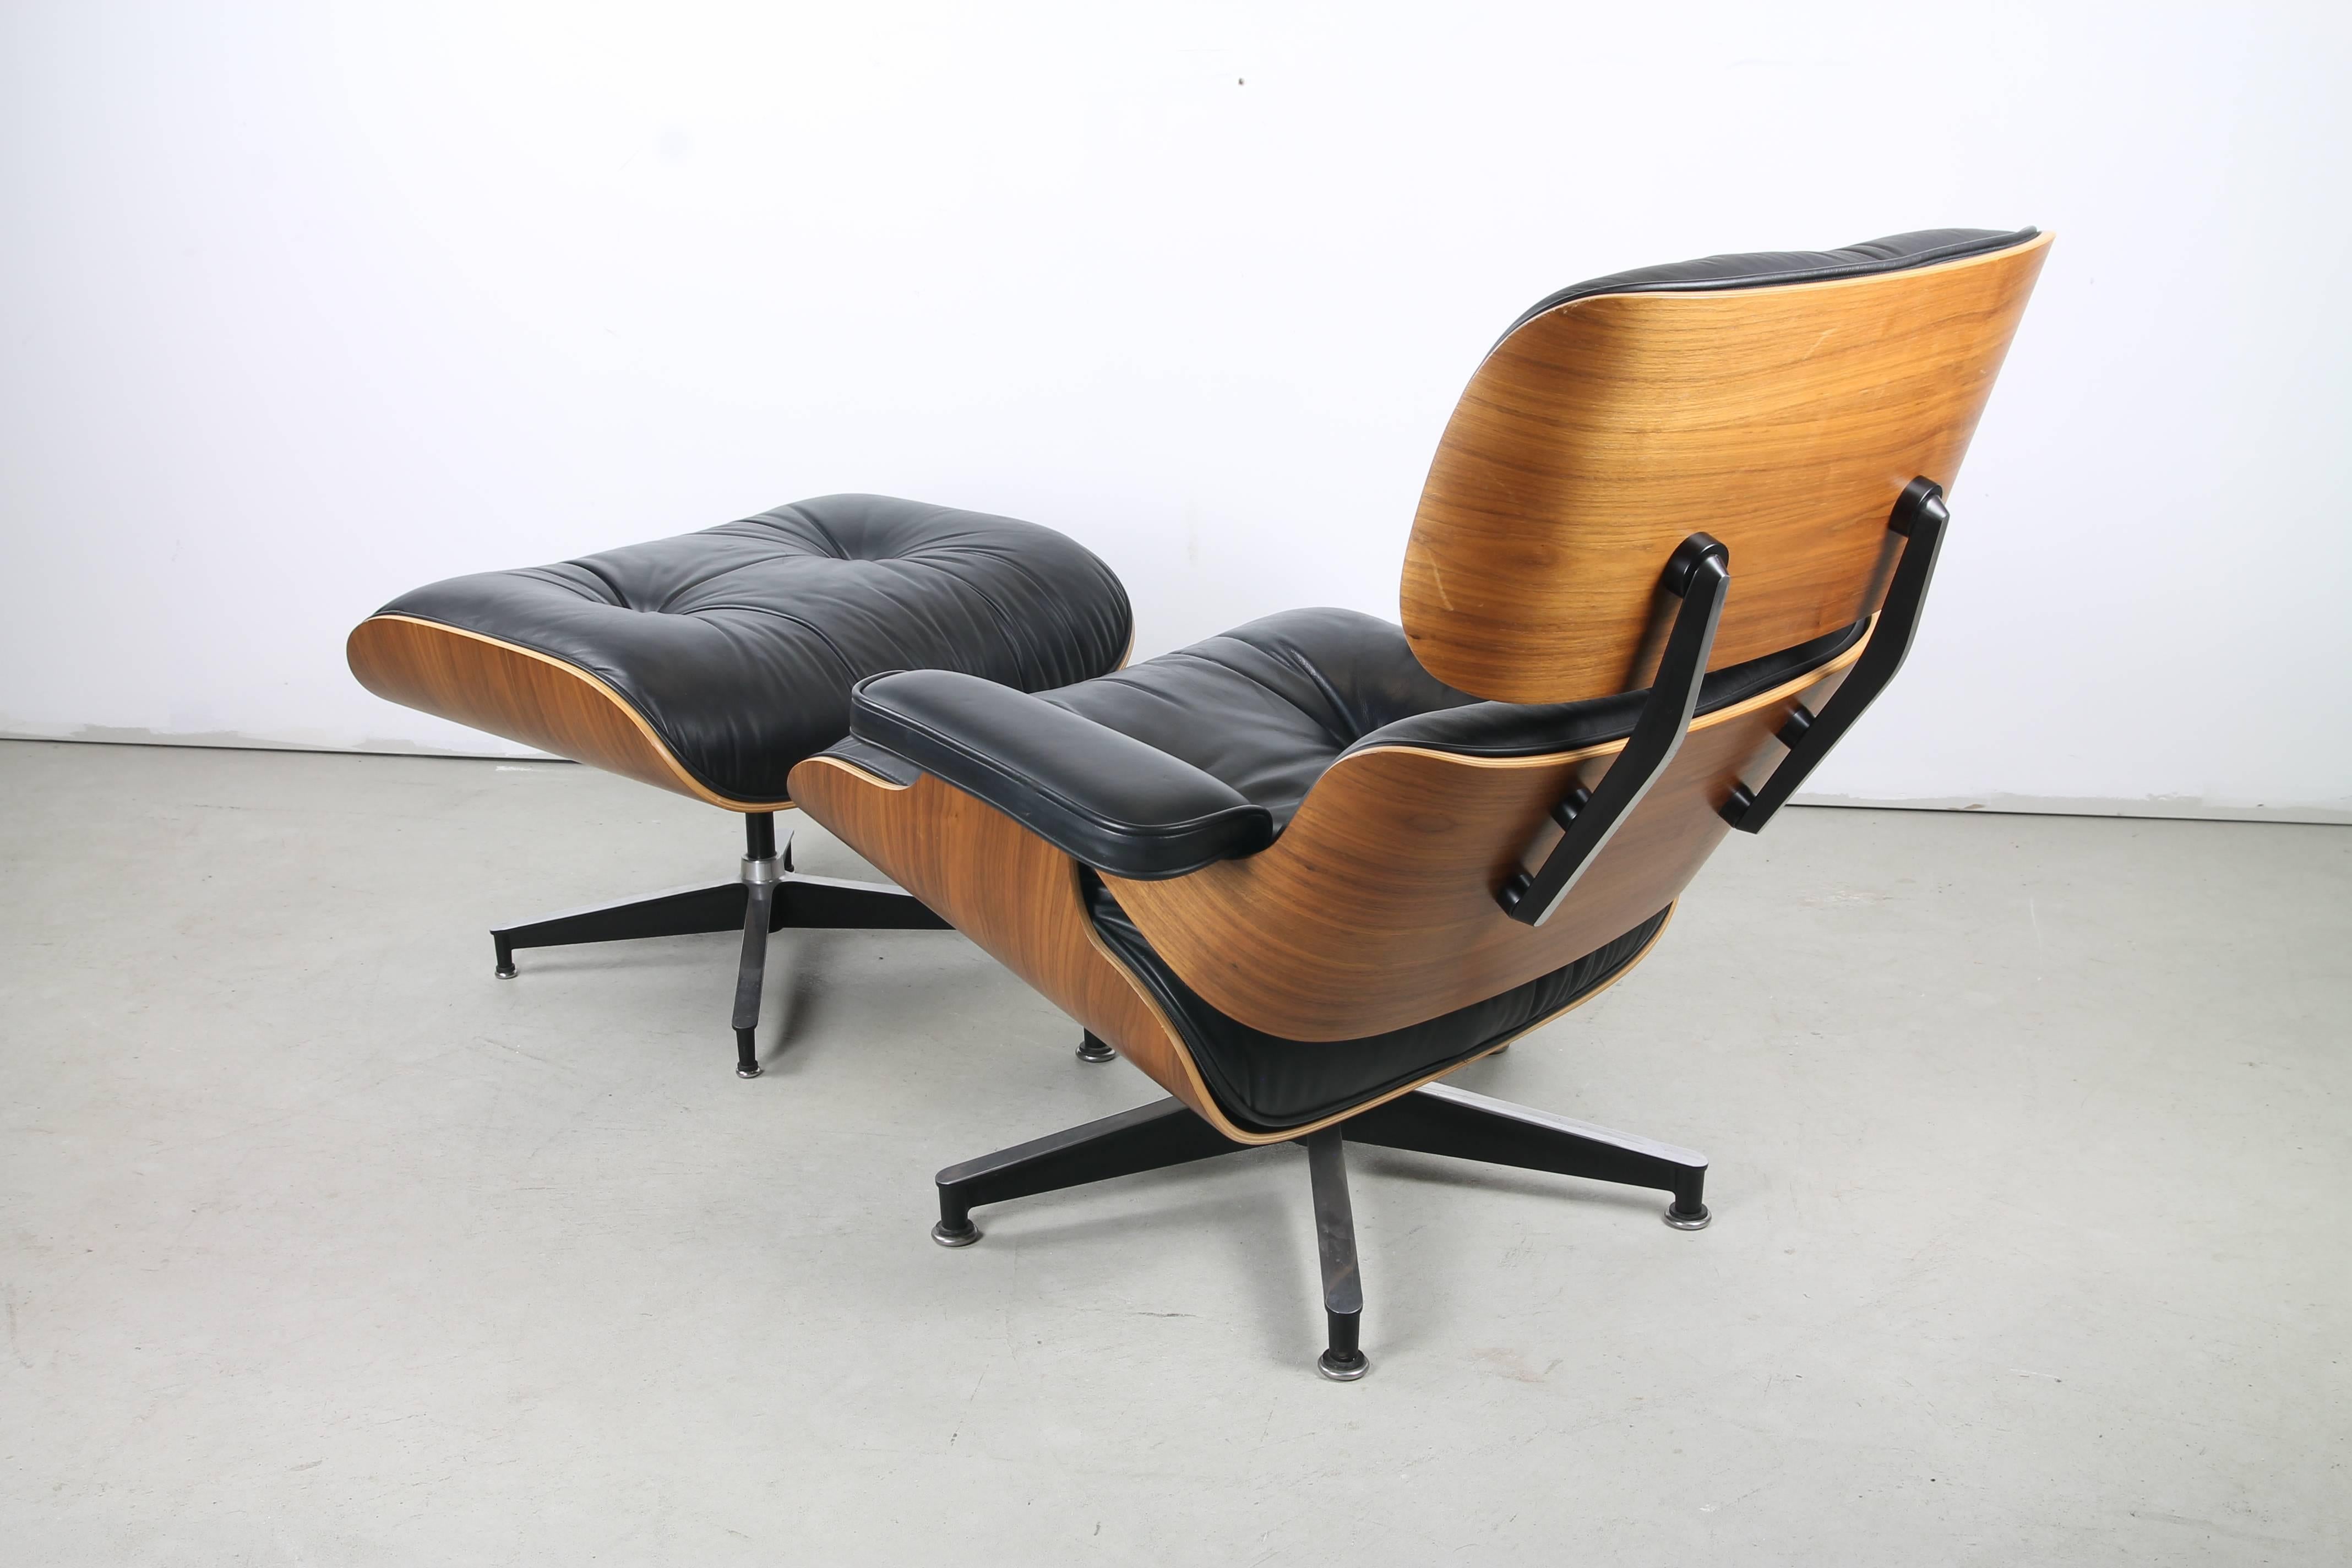 An immaculate 670 lounge and 671 ottoman in walnut by Charles and Ray Eames for Herman Miller, featuring sinuous multi-bend plywood shells framing supple, tufted leather upholstery. The chair swivels on a chromed steel 5-point base. The ottoman is